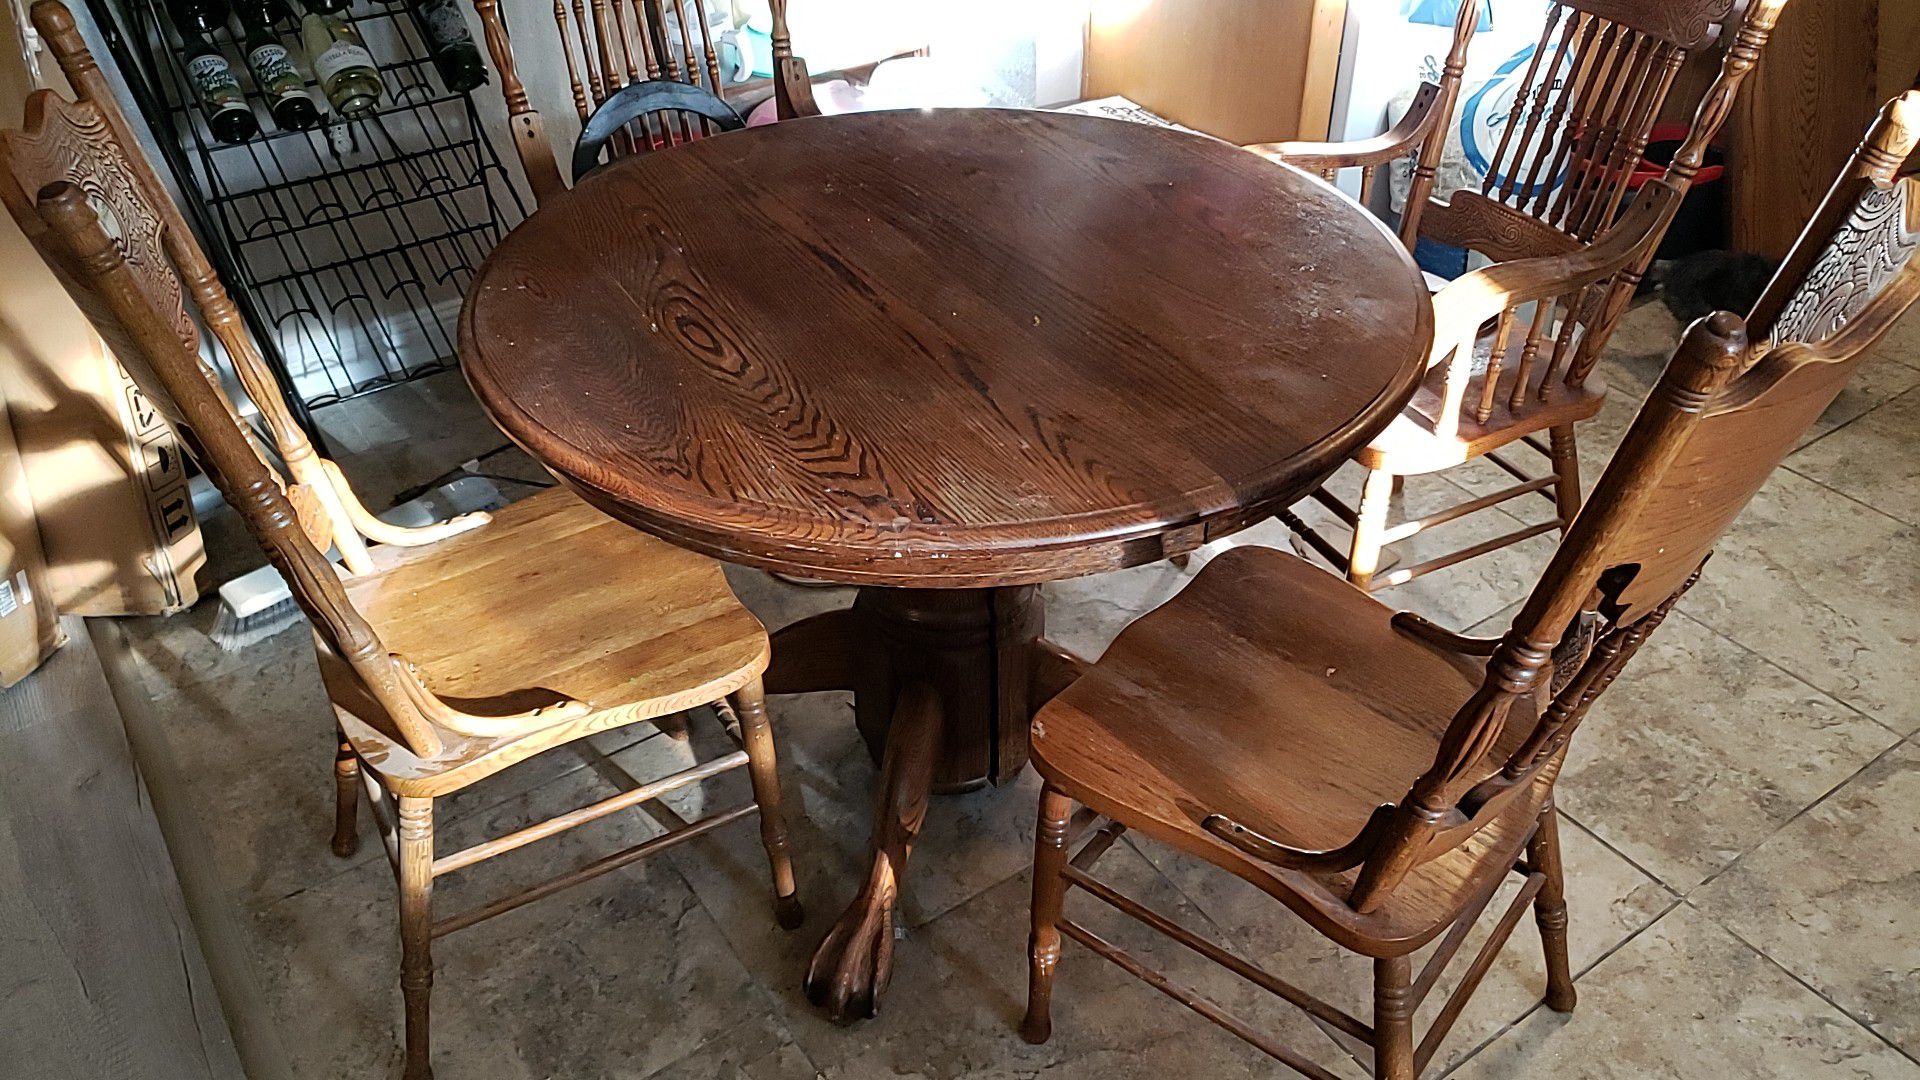 Kitchen table with chairs and extension